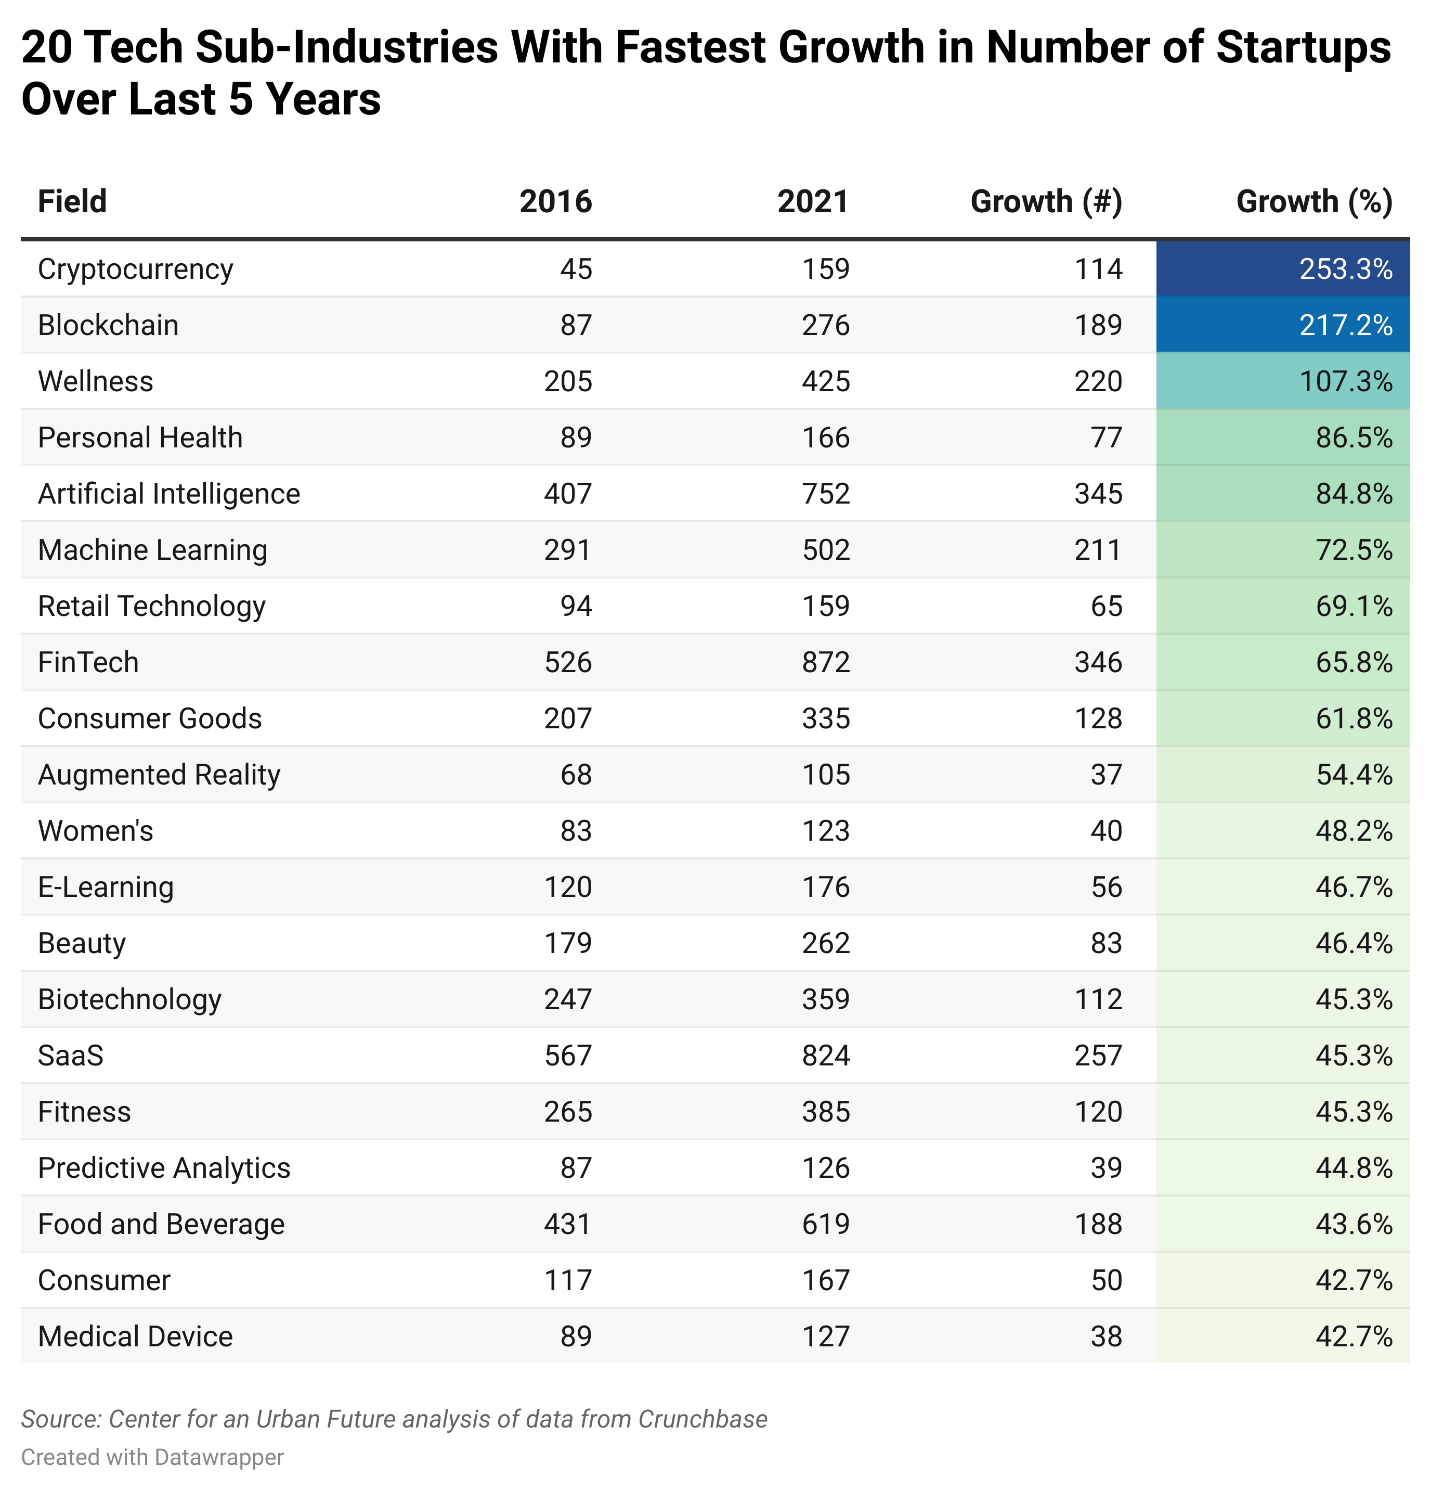 Table with sub-industries with the fastest growth in number of startups over the last 5 years